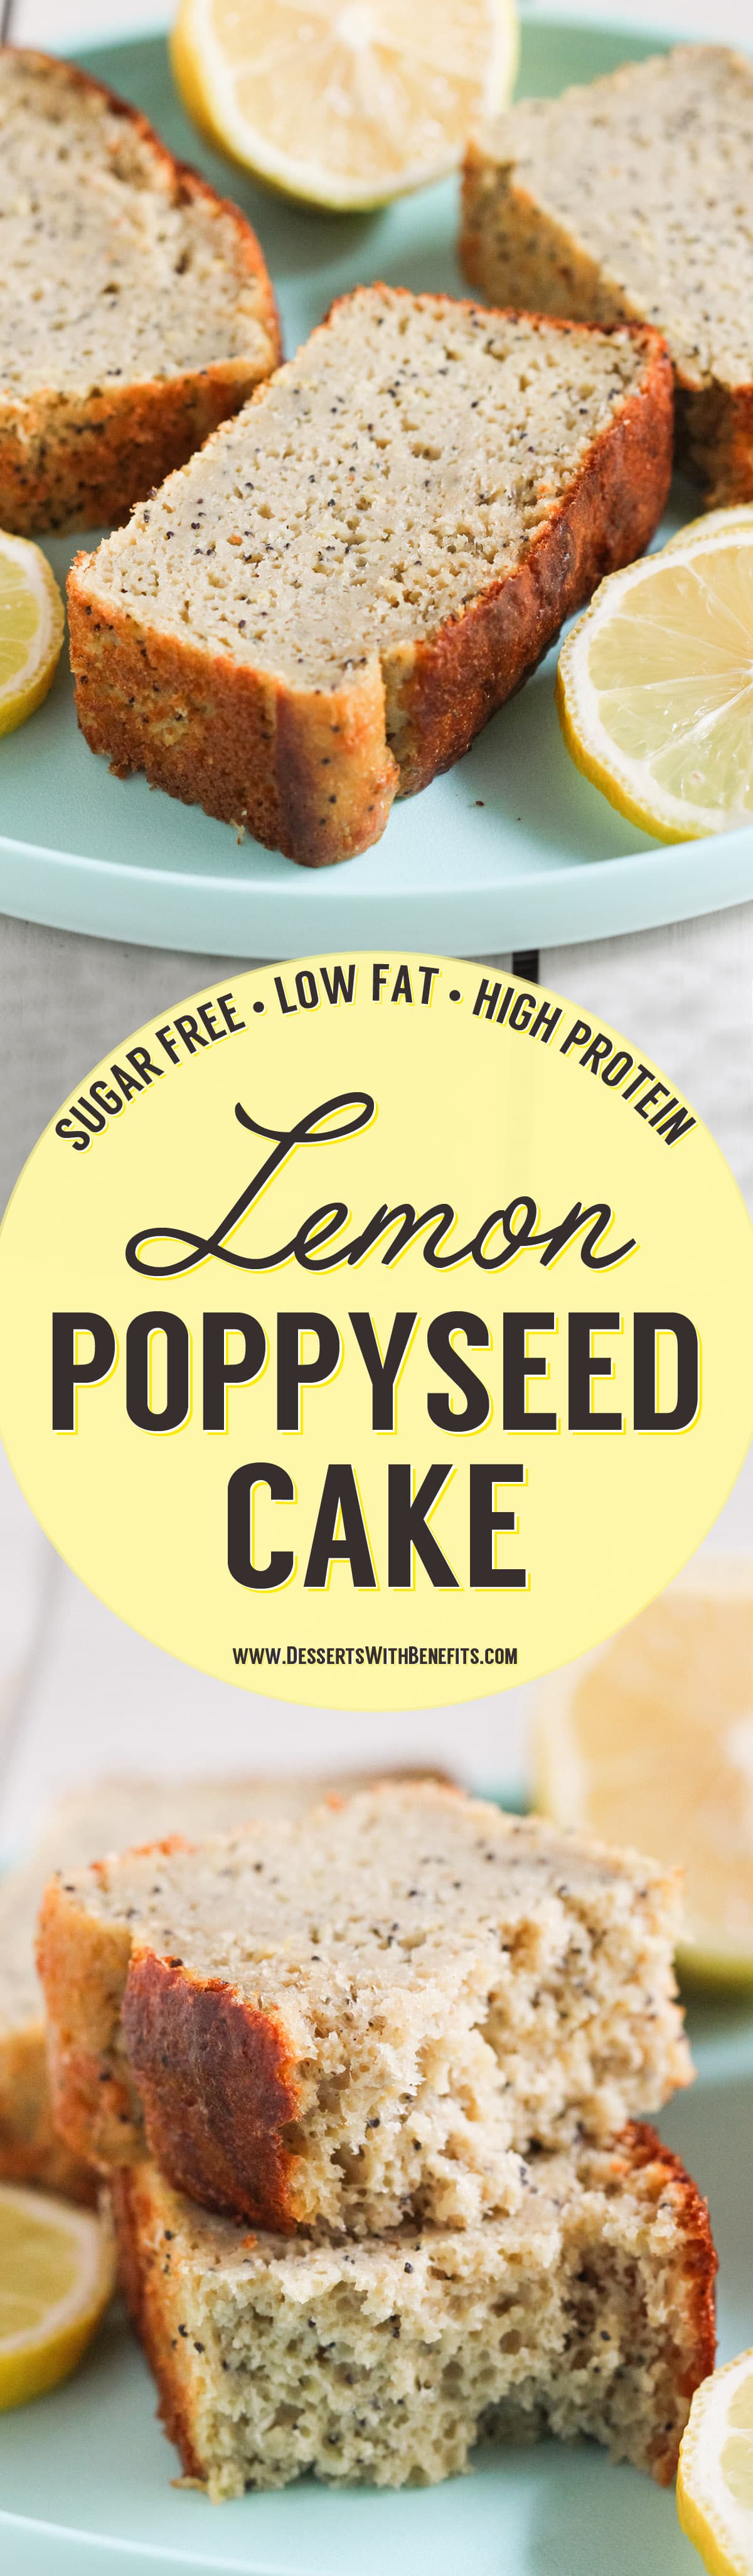 This Healthy Lemon Poppyseed Cake doesn't taste healthy in the slightest! It's sweet, it's moist, it's springy and fluffy -- everything a cake should be. The only difference is that this recipe is sugar free, low fat, high protein, and 100% whole grain! Healthy Dessert Recipes with sugar free, low calorie, low fat, low carb, high protein, gluten free, dairy free, vegan, and raw options at the Desserts With Benefits Blog (www.DessertsWithBenefits.com)